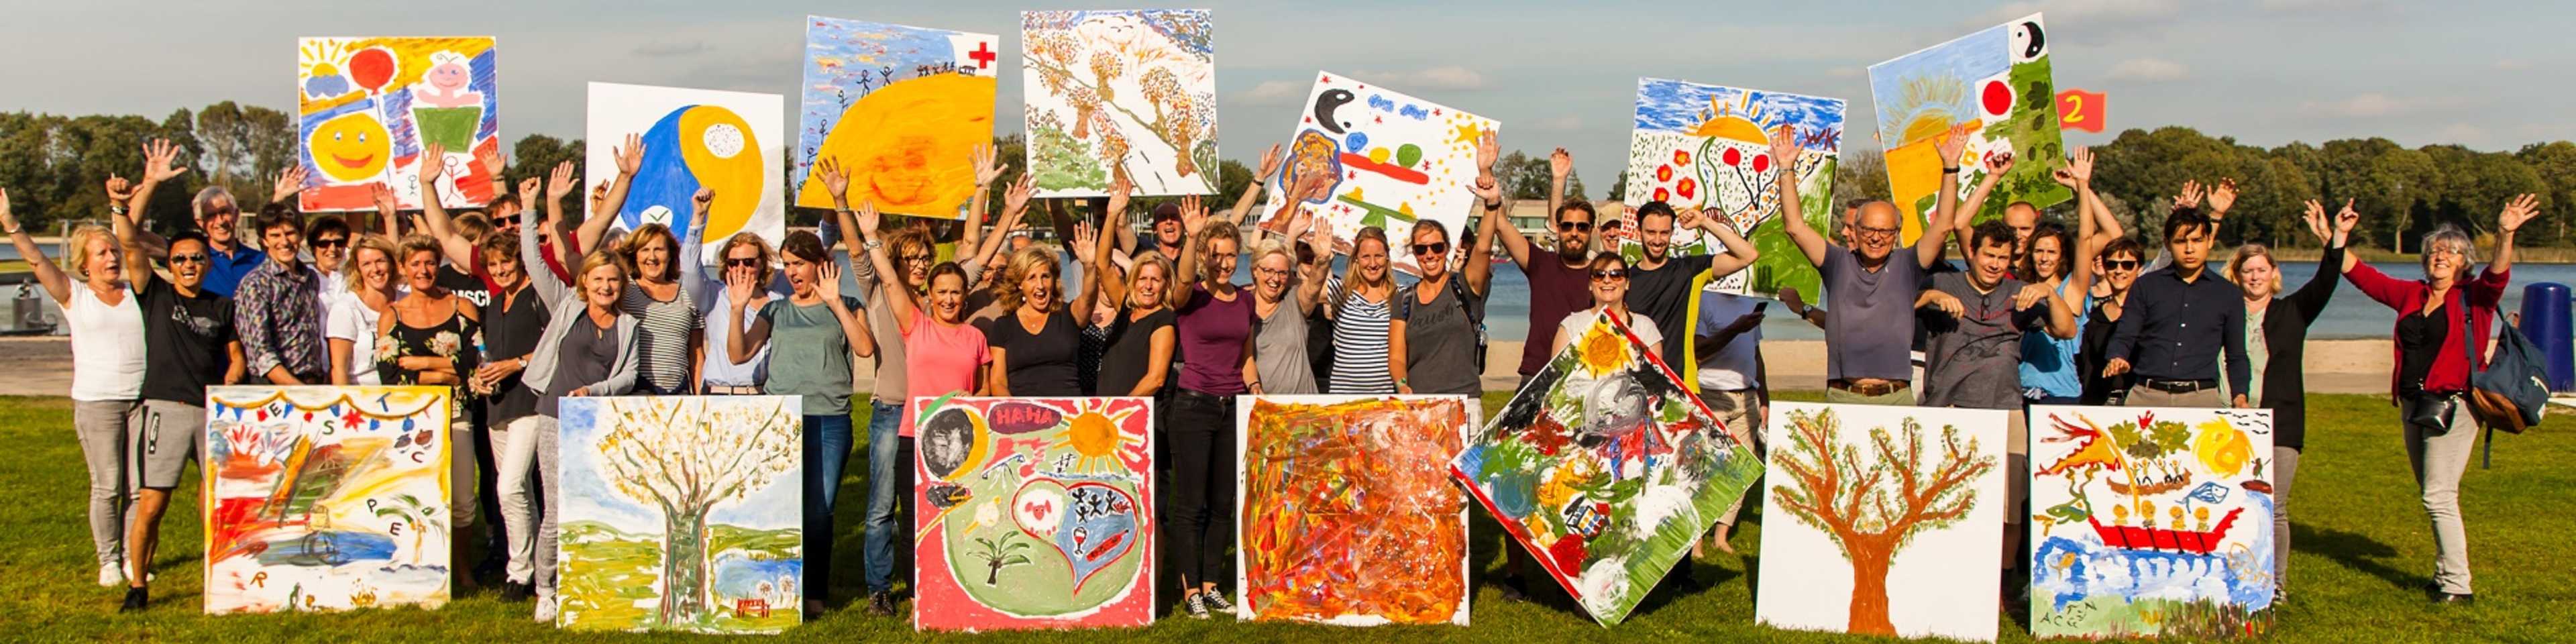 Global Values Day 2018 at Wolters Kluwer